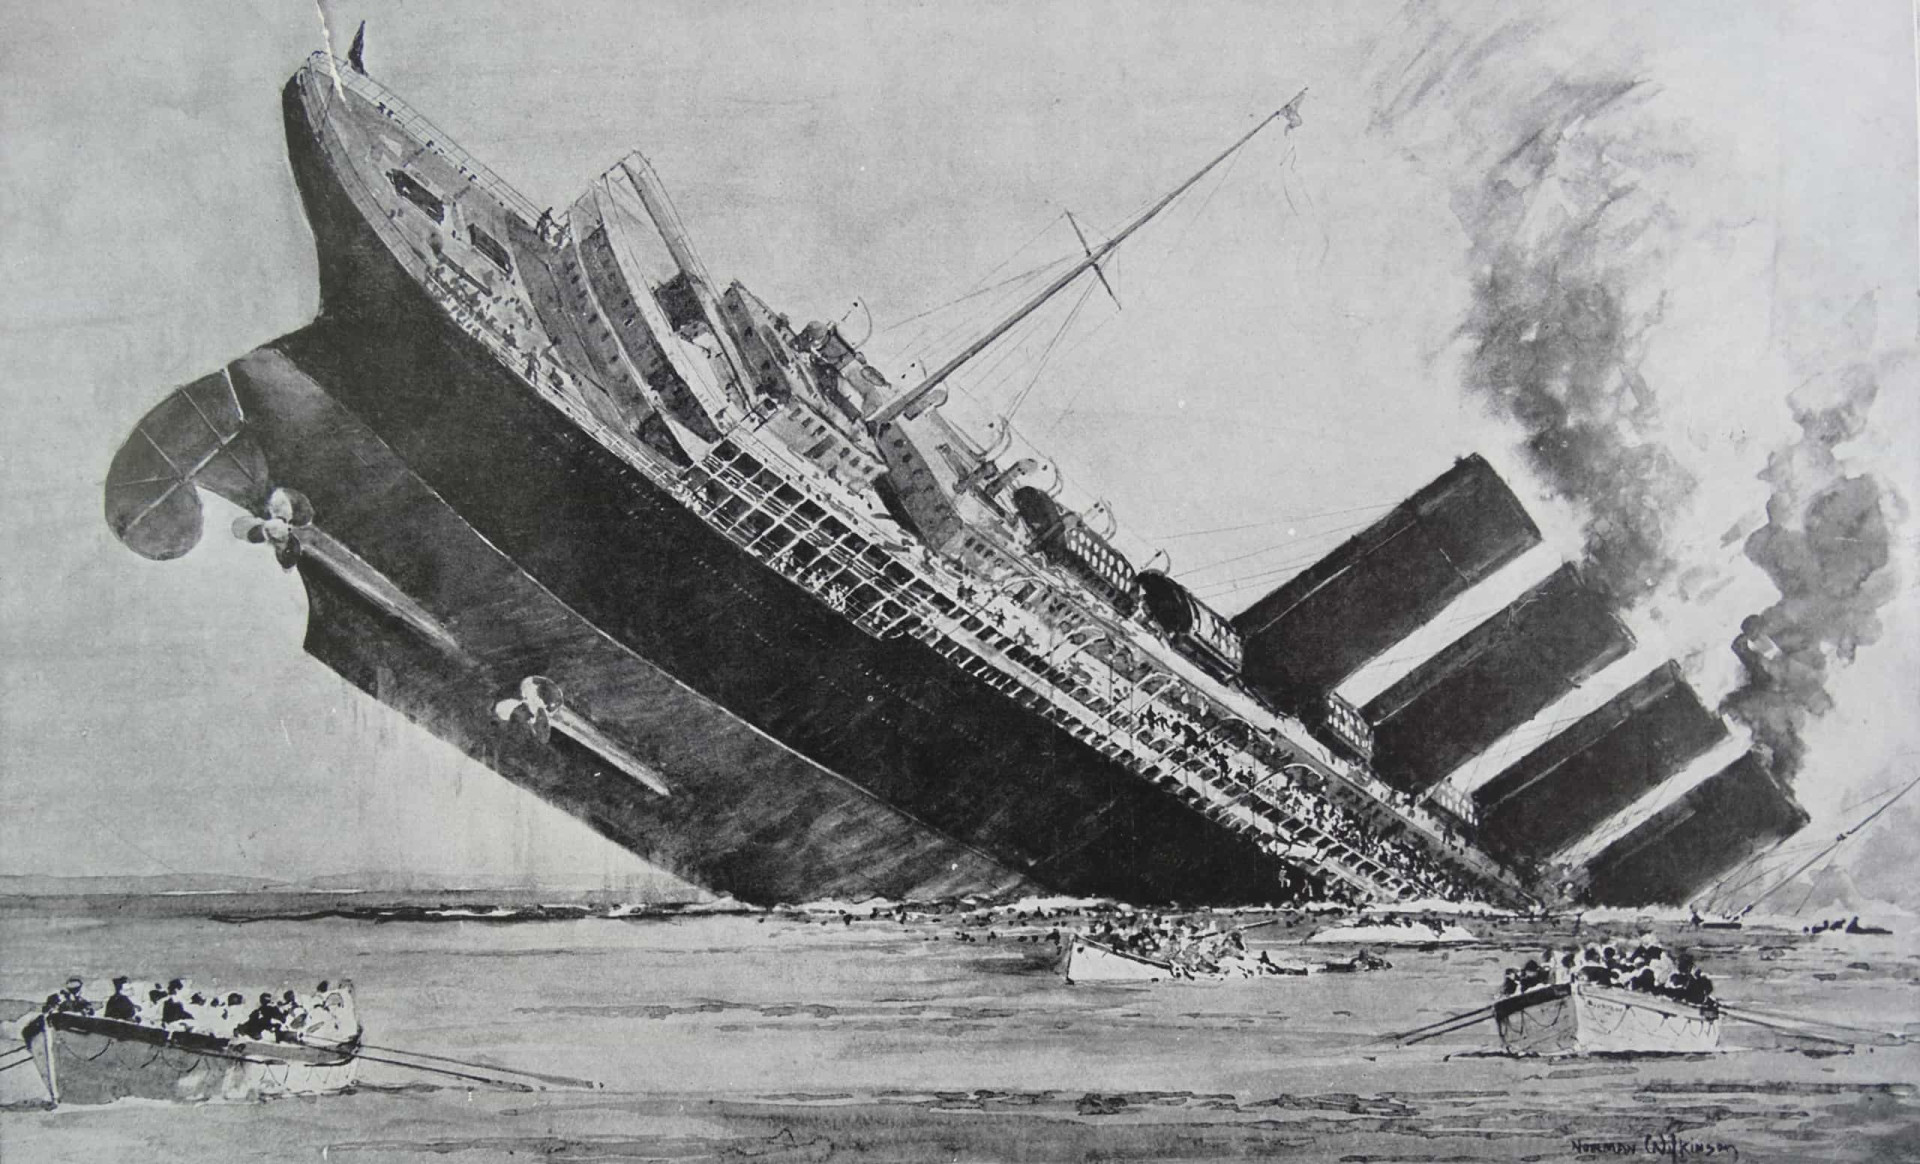 <p>The most high-profile sinking of a passenger liner during the First World War was that of the Cunard liner RMS <em>Lusitania</em>. On May 7, 1915, the vessel was hit by a single torpedo, fired from the German submarine <em>U-20</em>. It took less than 20 minutes for the Atlantic to claim the ship, with just 761 people surviving out of the 1,266 passengers and 696 crew aboard, with 123 of the casualties being American citizens. <em>Lusitania</em> had not been drafted into the war effort and was following its regular route between Liverpool and New York City. The casualties were all civilians. Its loss contributed to the American entry into the conflict two years later.</p><p>You may also like:<a href="https://www.starsinsider.com/n/398508?utm_source=msn.com&utm_medium=display&utm_campaign=referral_description&utm_content=502910v1en-ae"> Celebrity airport and airplane altercations</a></p>